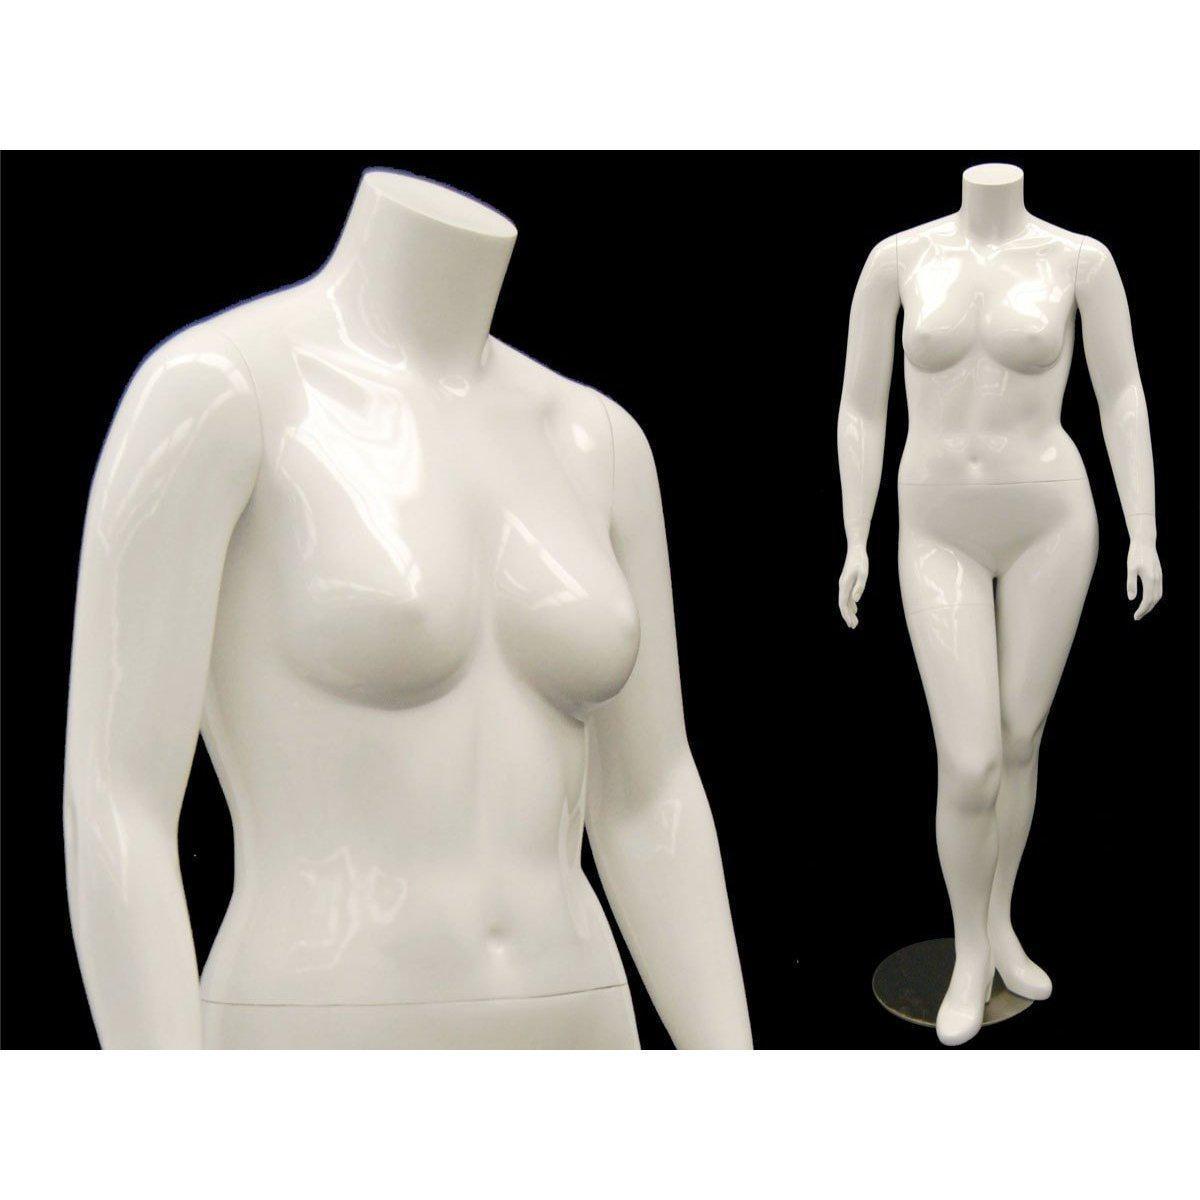 Plus Size Female Headless Mannequin MM-RPLUSF1 - Mannequin Mall